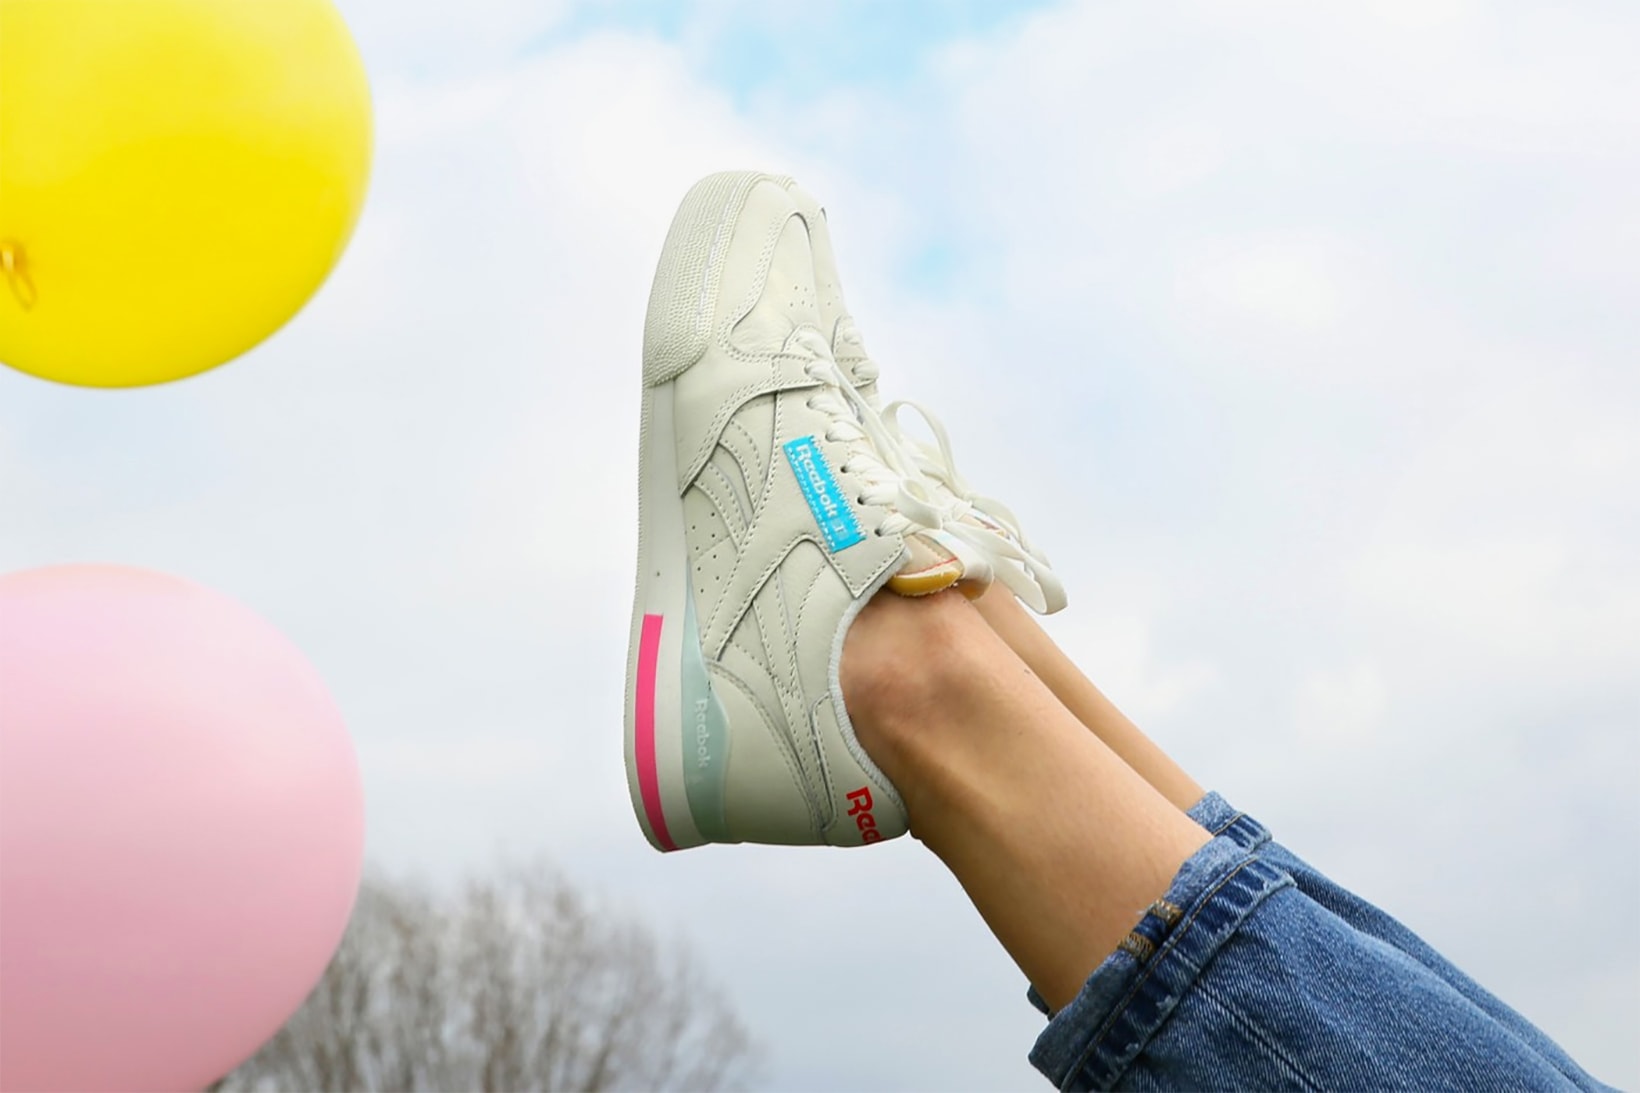 reebok 40 percent off amazon prime day 2019 sale discount shopping 